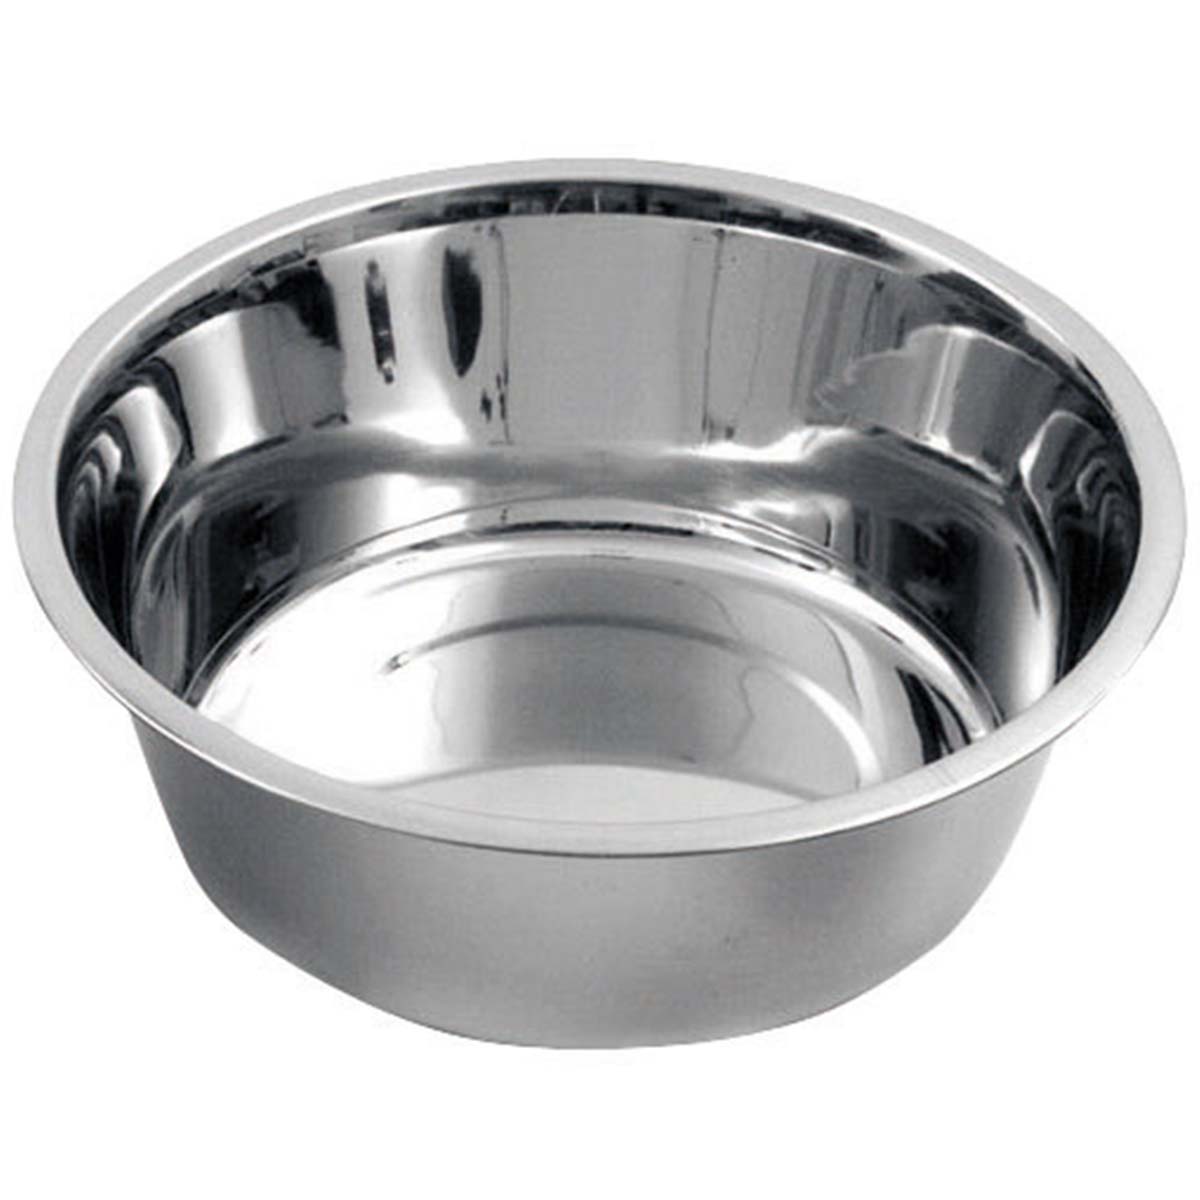 Bowl holder for walls and kennels incl. 2 bowls 2800 ml